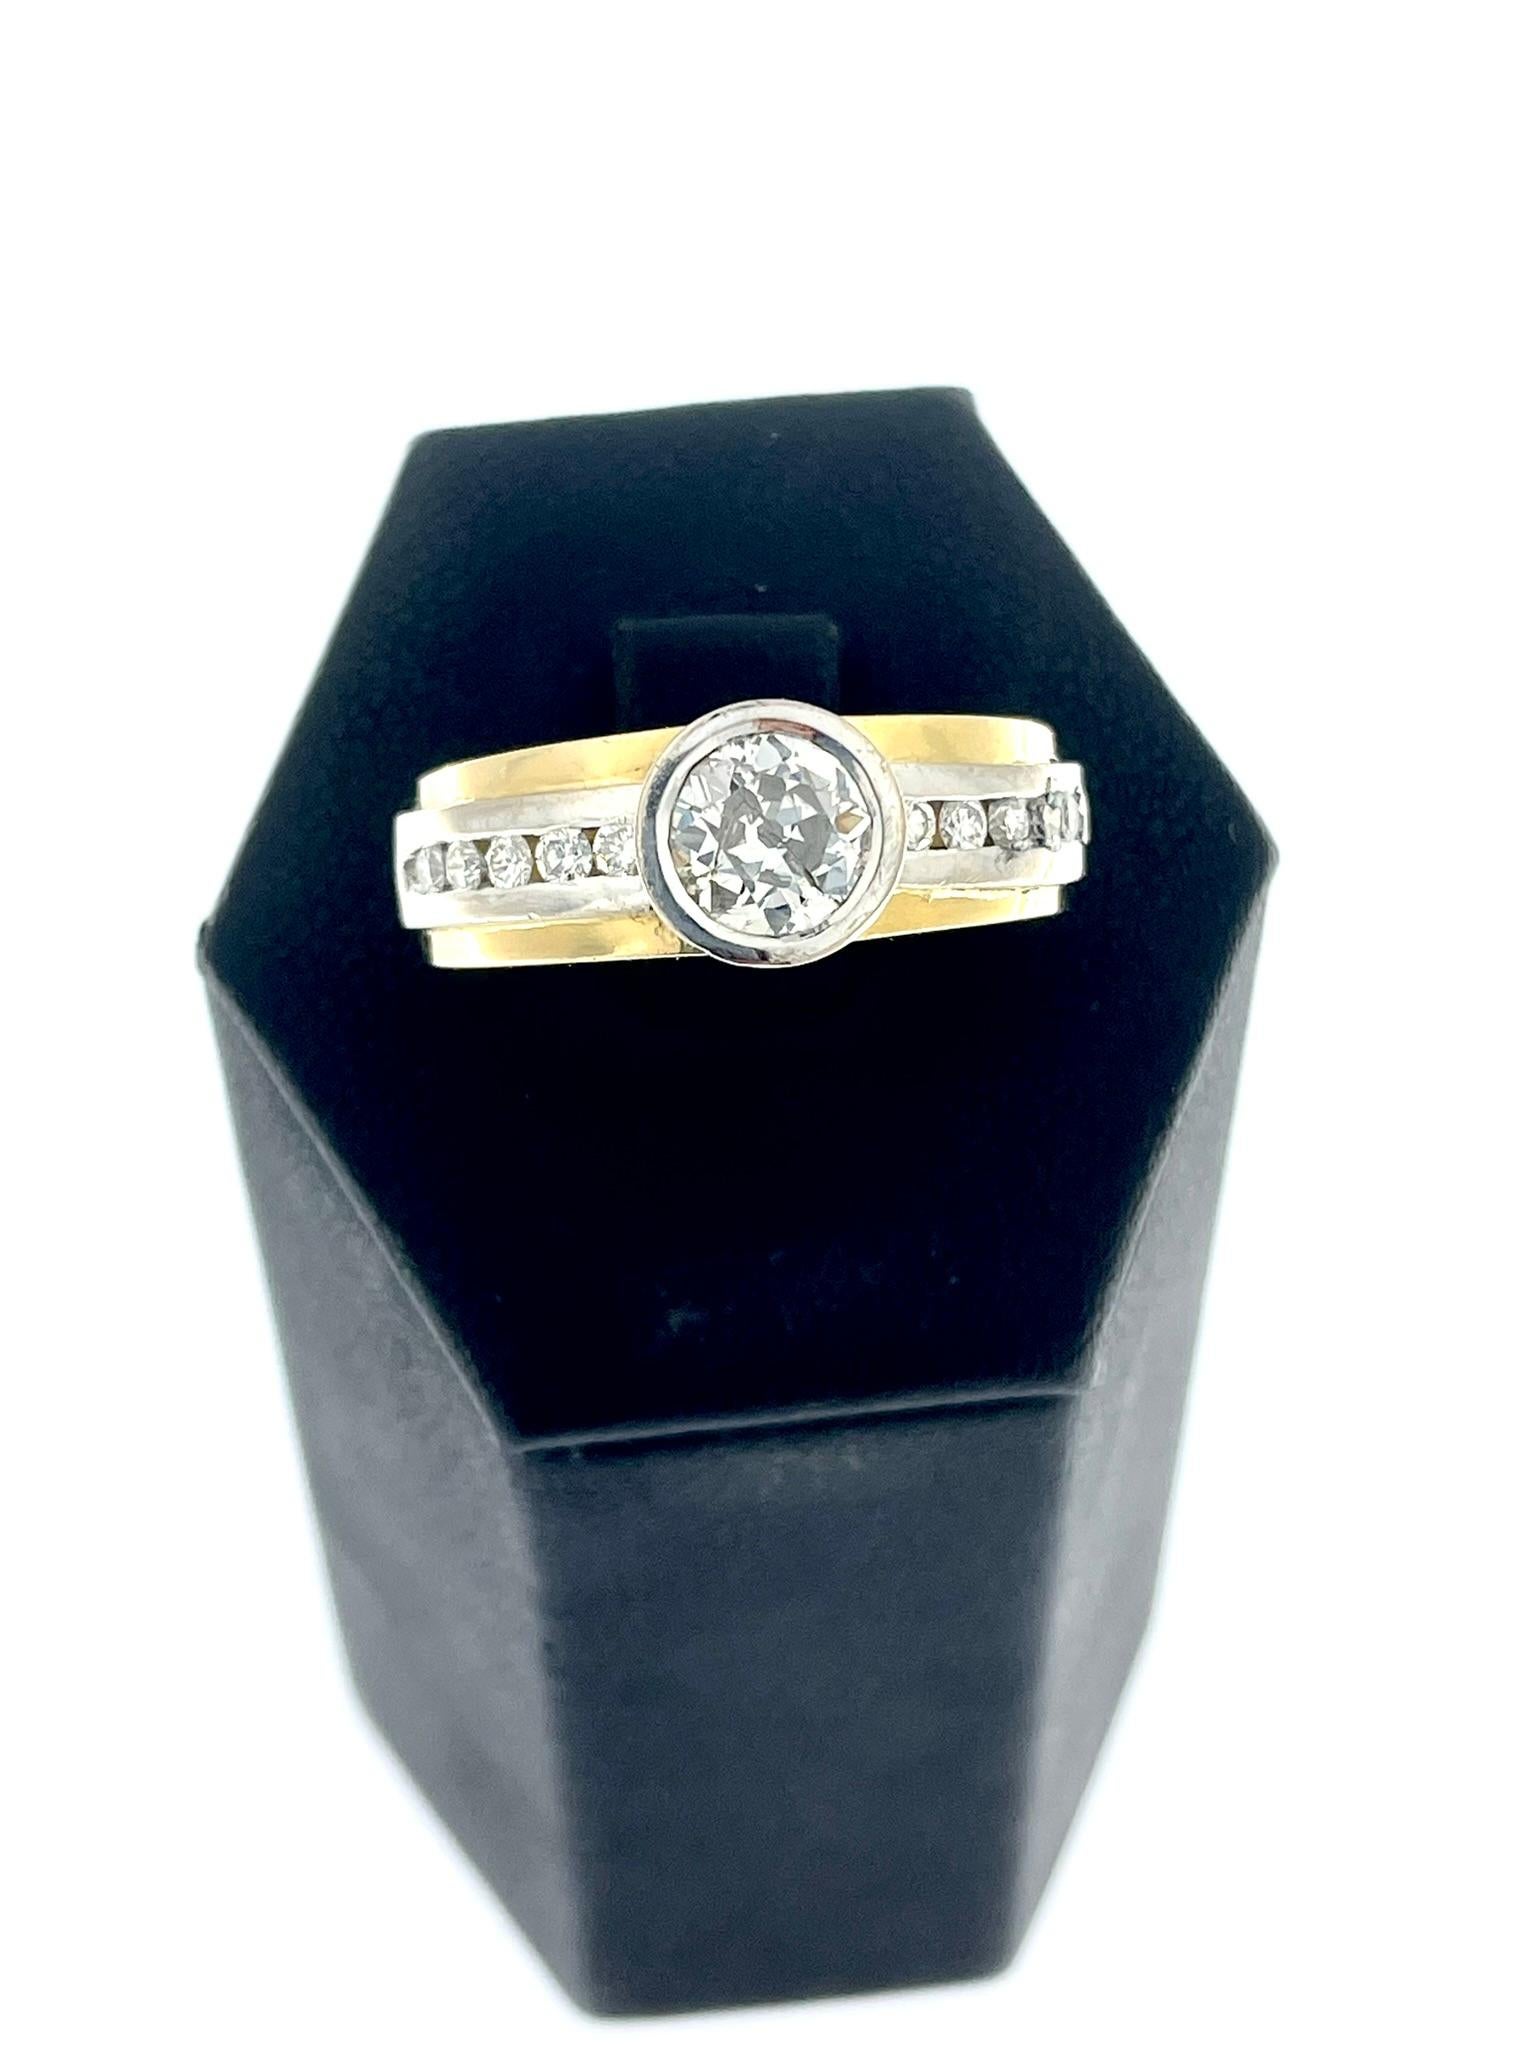 HRD Certified 1.40ct Diamond Ring Yellow and White Gold In Fair Condition For Sale In Esch-Sur-Alzette, LU